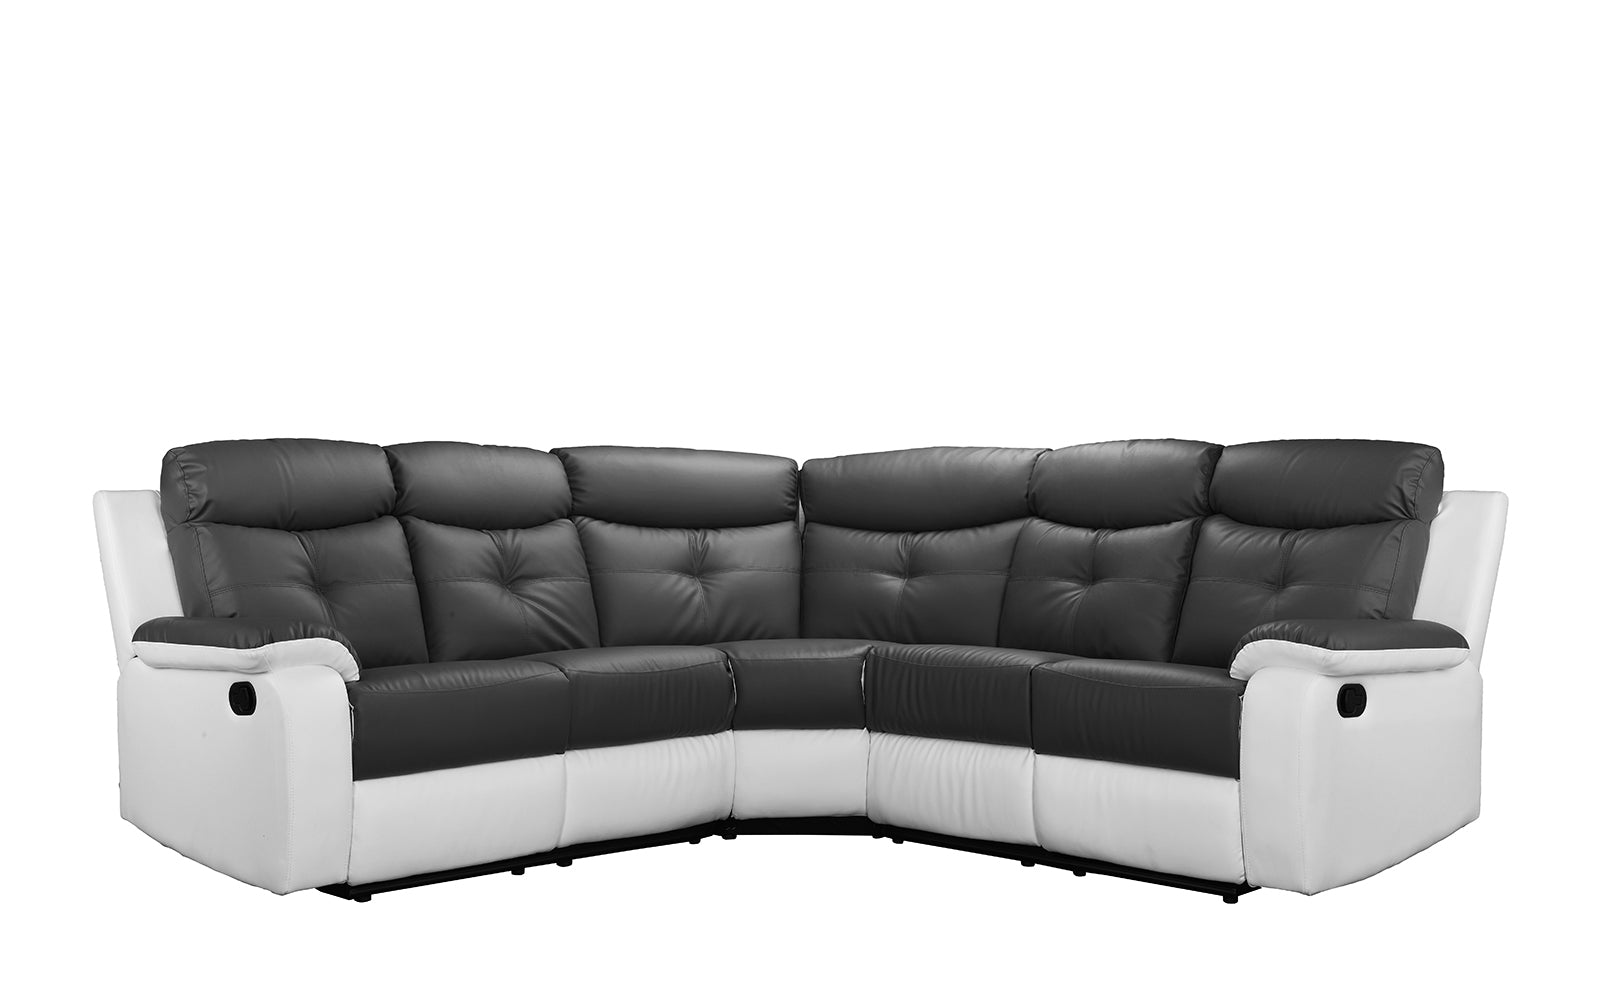 Jaime Traditional Bonded Leather Reclining Sectional Sofa